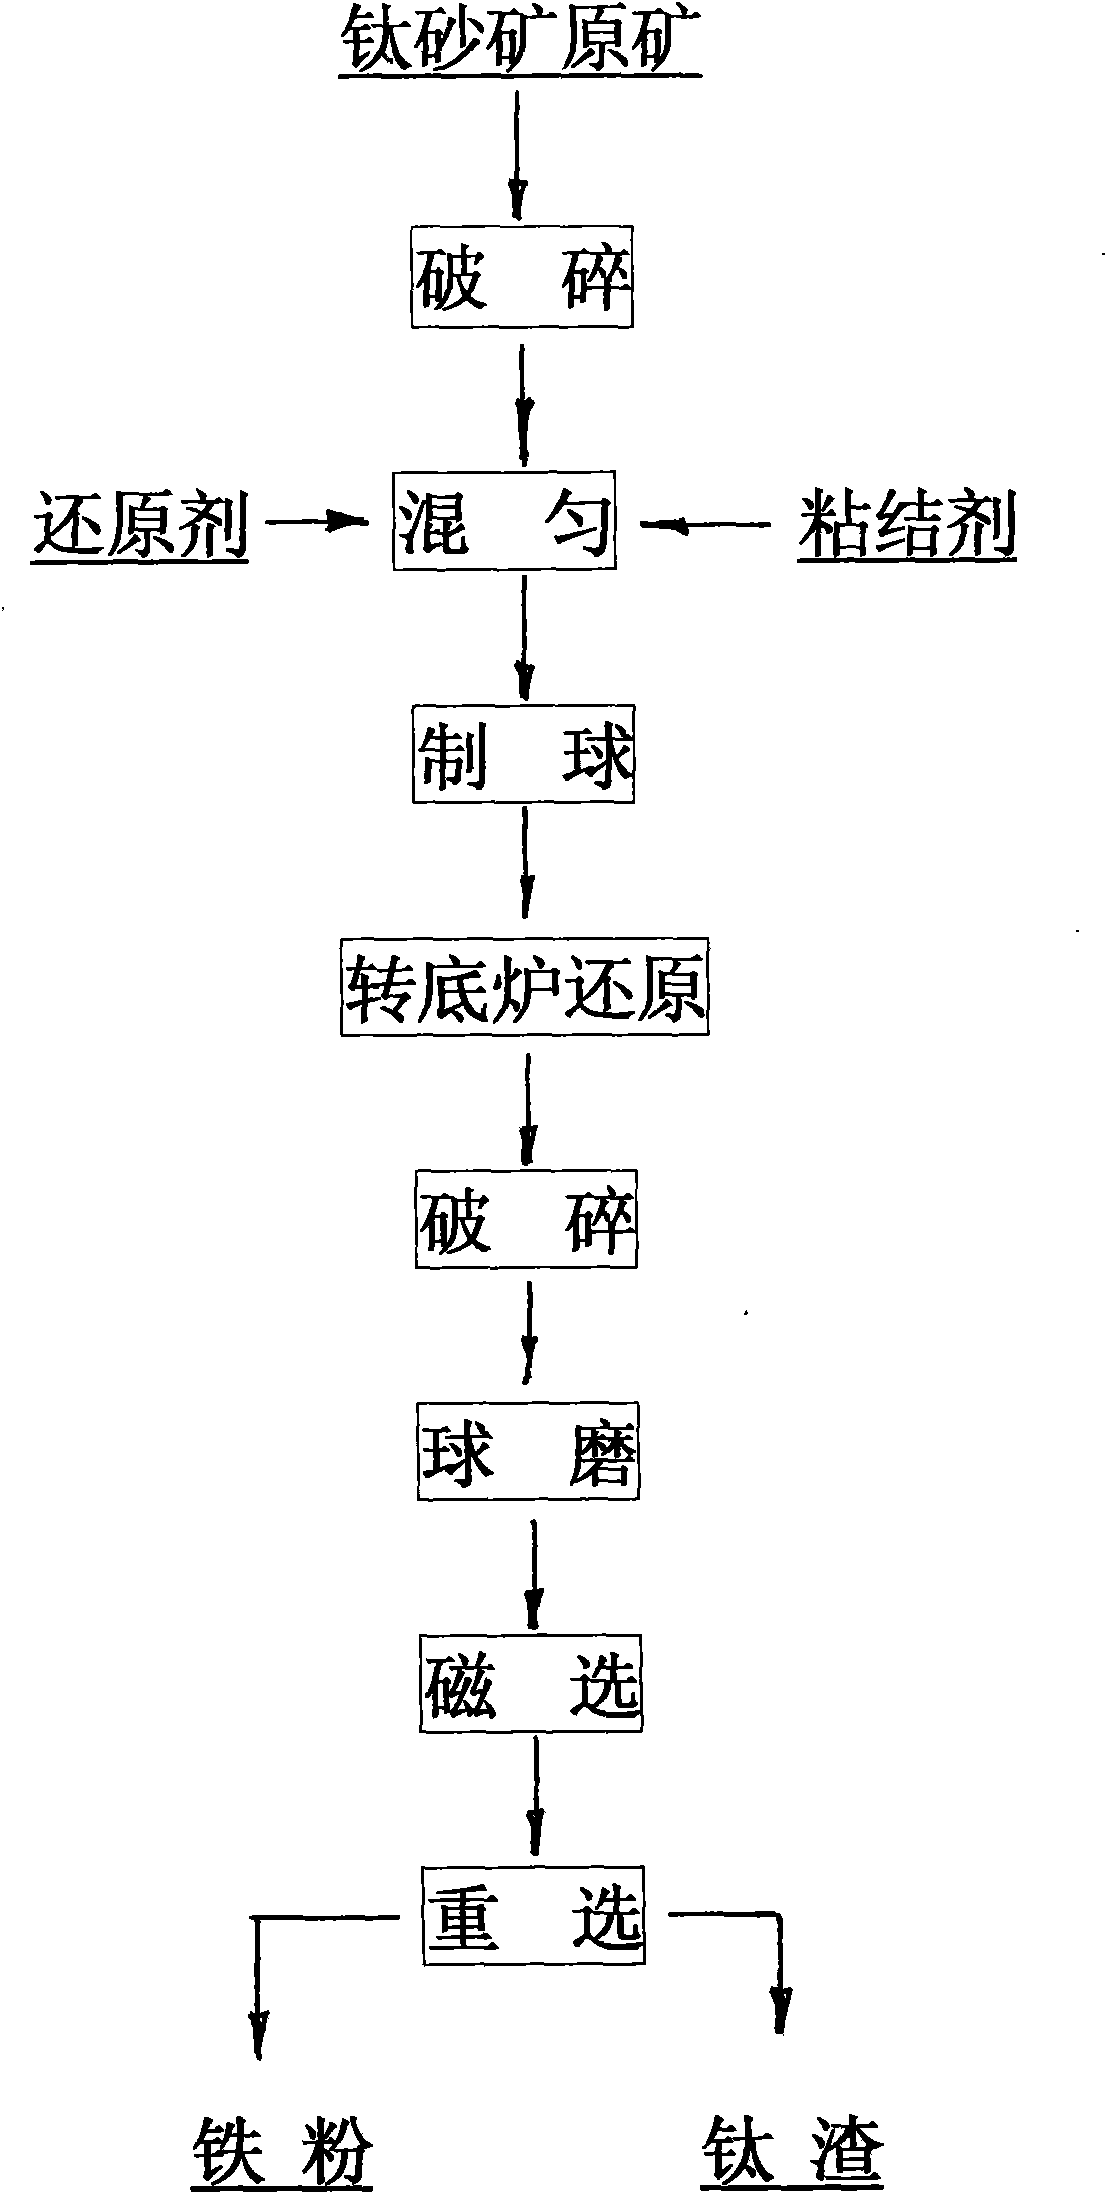 Method for producing ferrous powder and co-production titanium slag by rapidly reducing titanium placer pellets by rotary hearth furnace